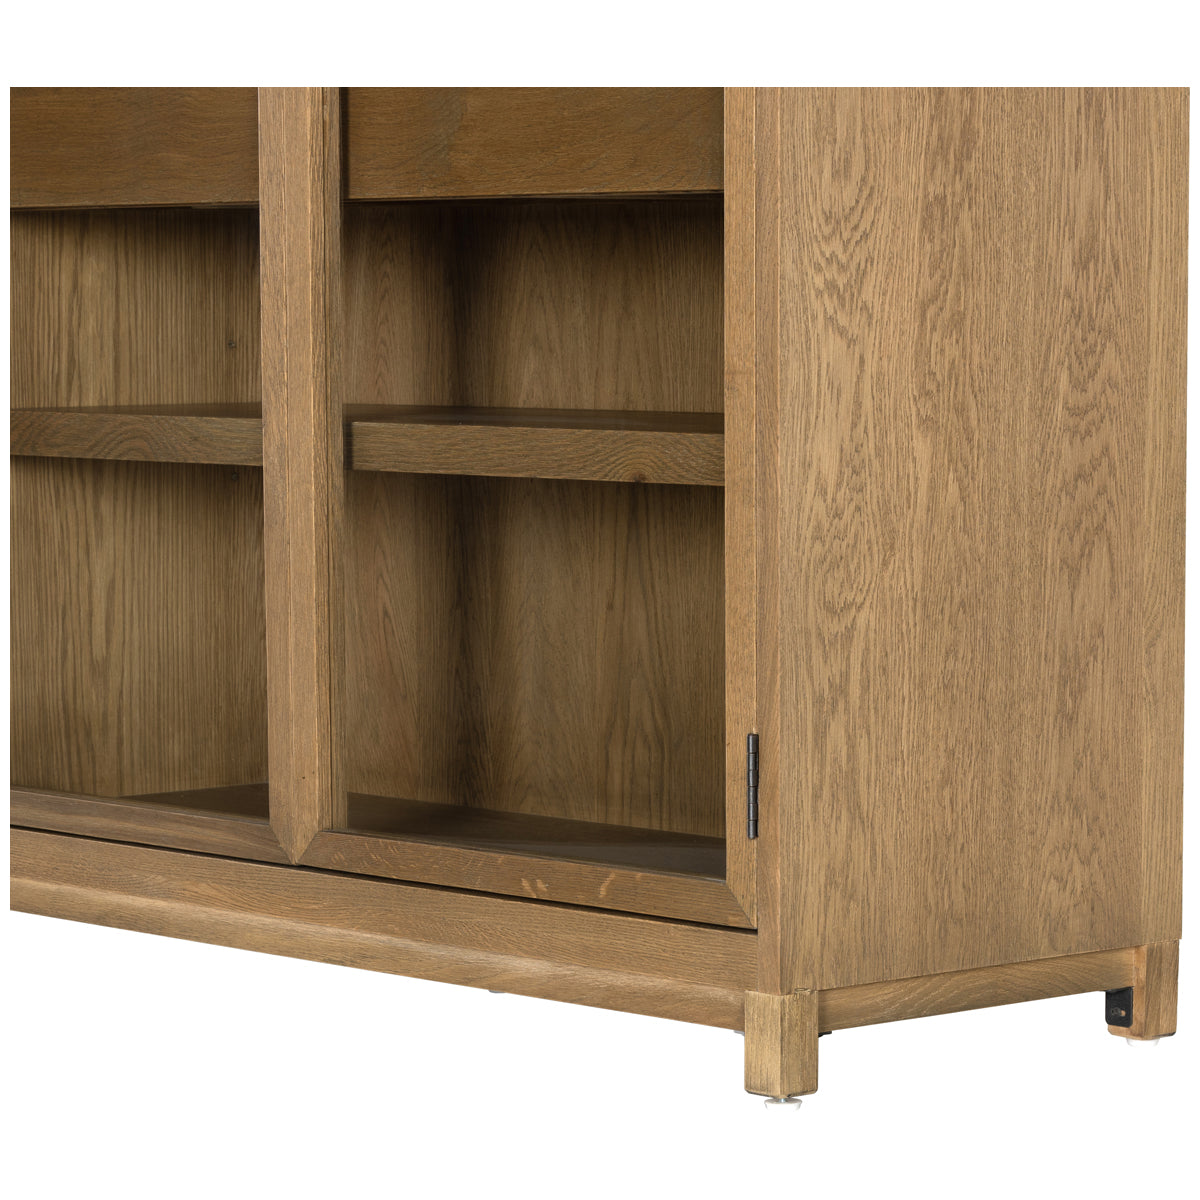 Four Hands Irondale Millie Double Cabinet - Drifted Oak